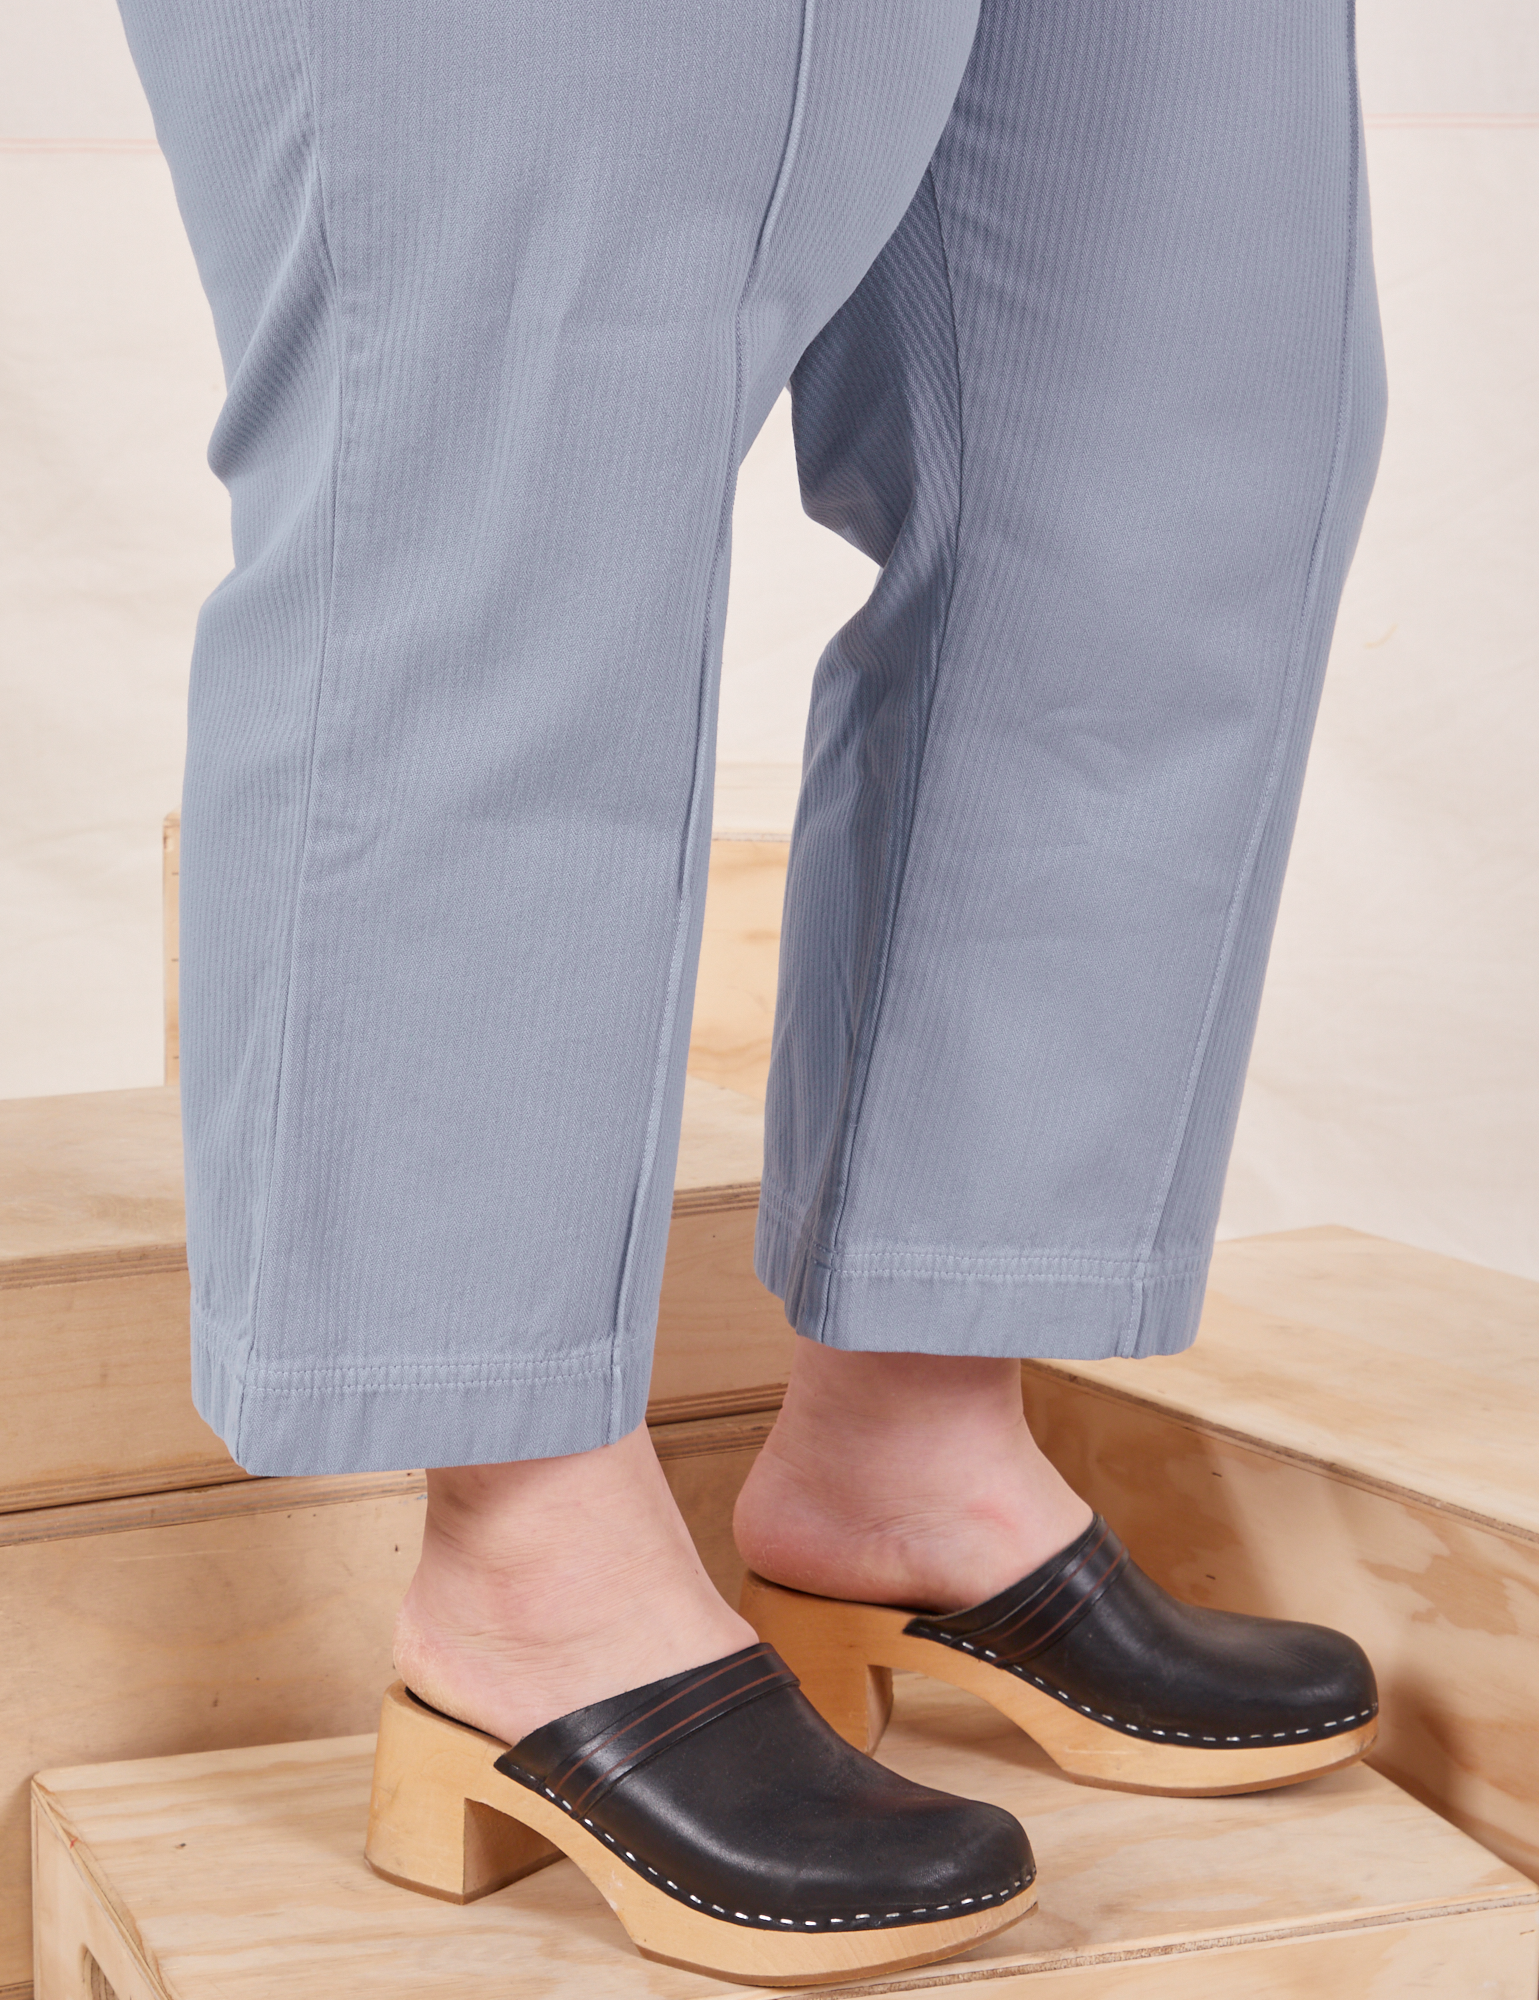 Heritage Westerns in Periwinkle pant leg side view on Ashley